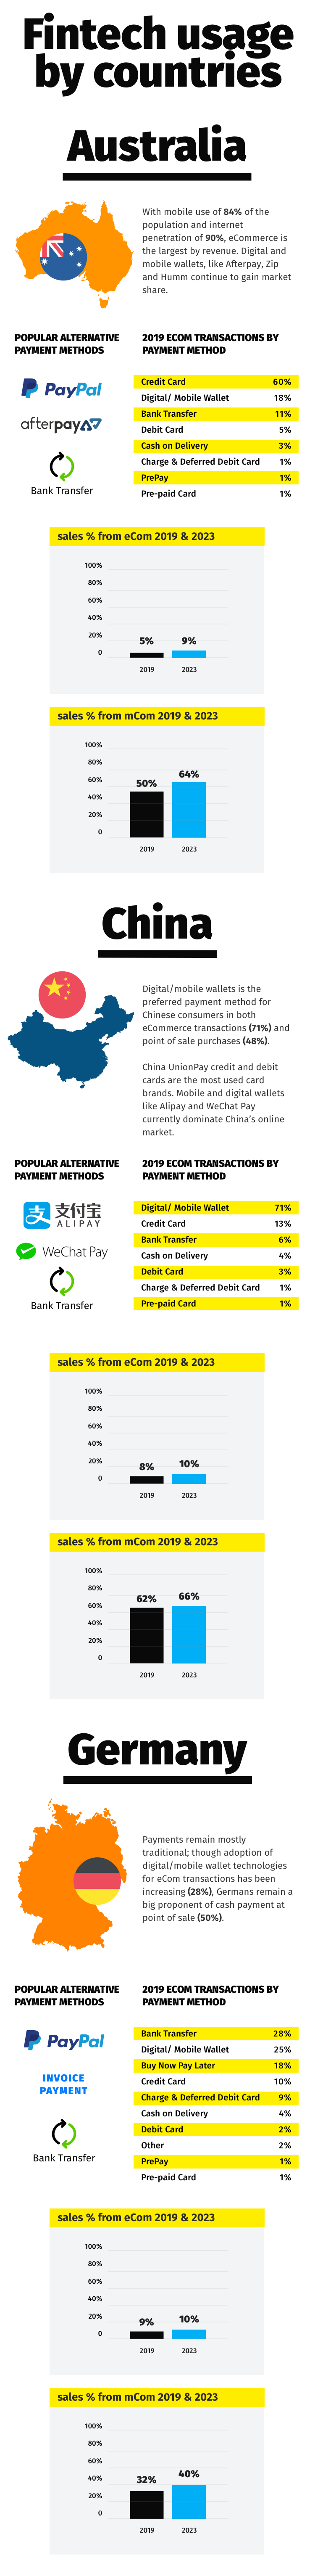 Infographic: Fintech Overview and Trends 2021 - 2022 - 13